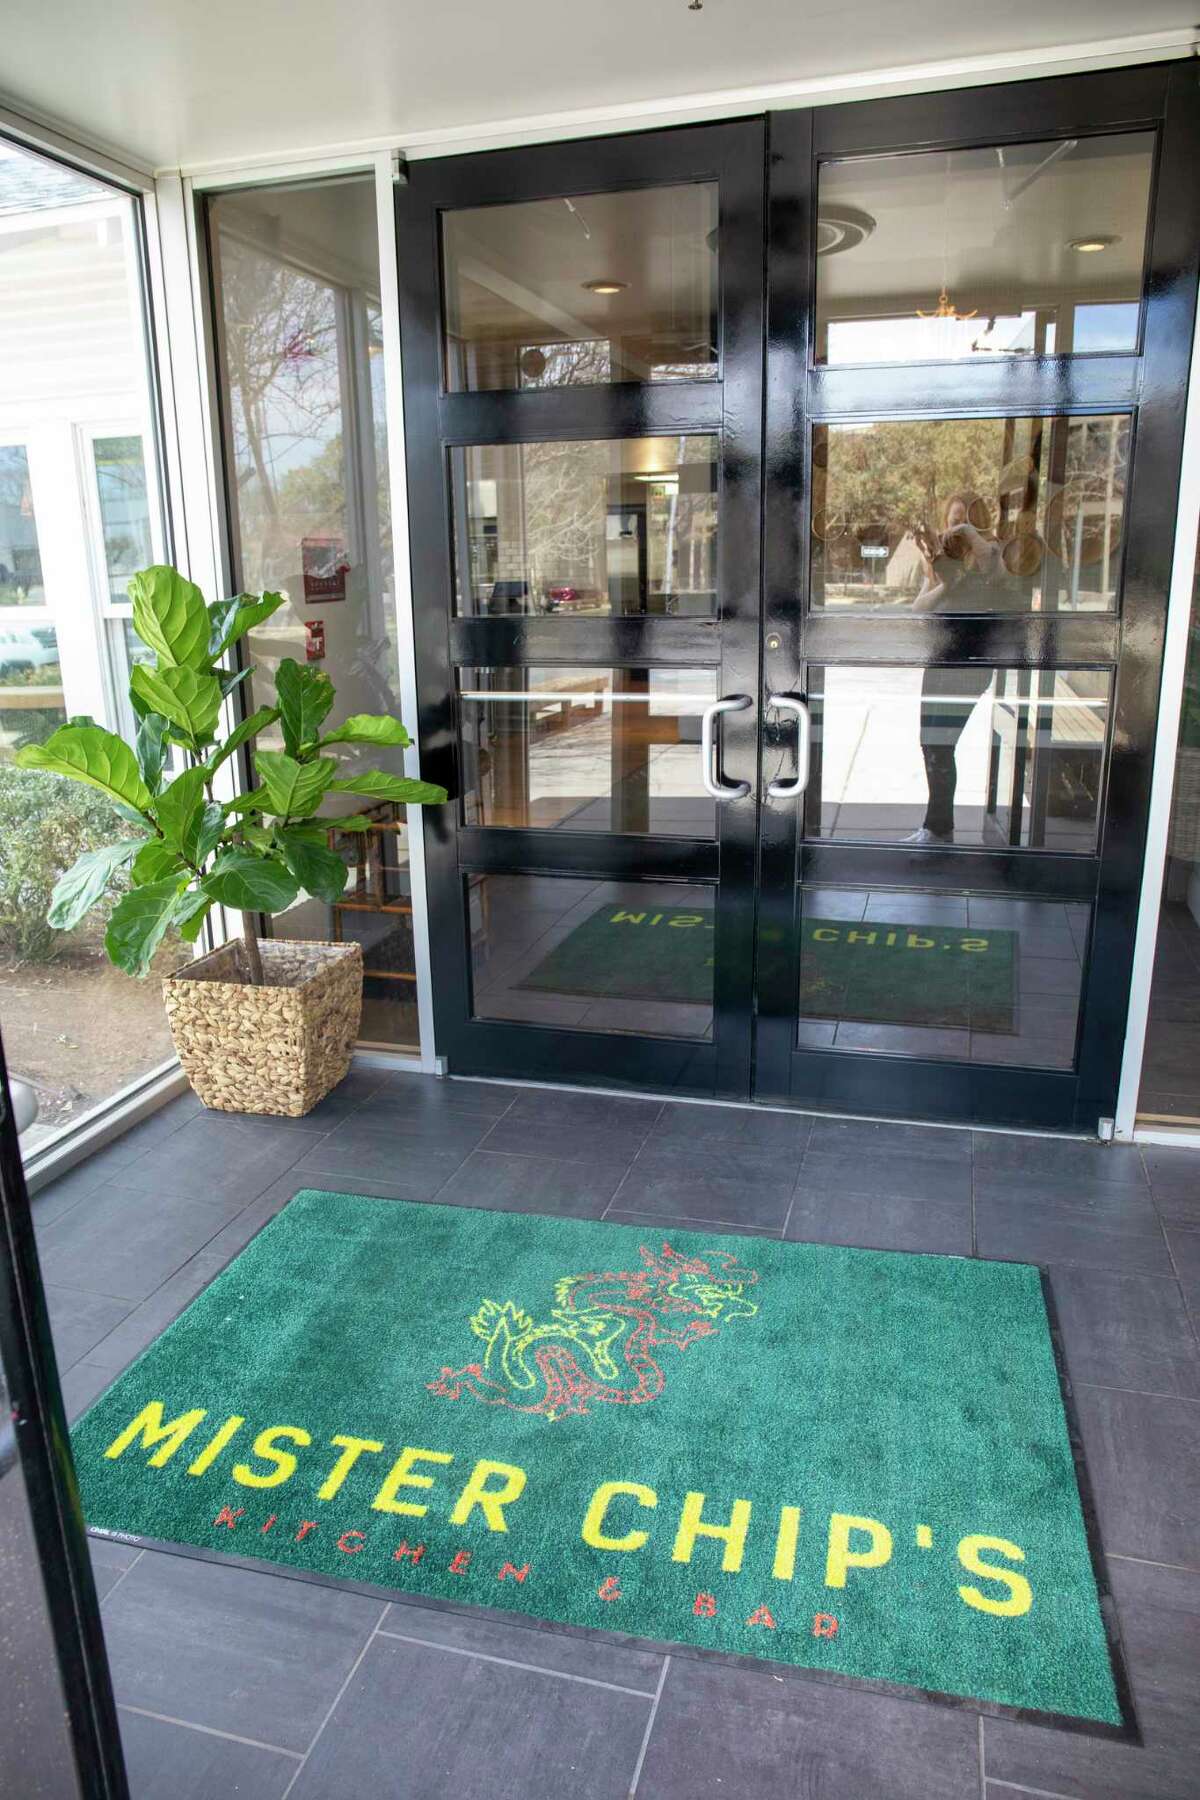 A sneak peek of Mister Chip’s Kitchen and Bar as seen Thursday, March 31, 2022 at 607 N. Colorado St. Jacy Lewis/Reporter-Telegram